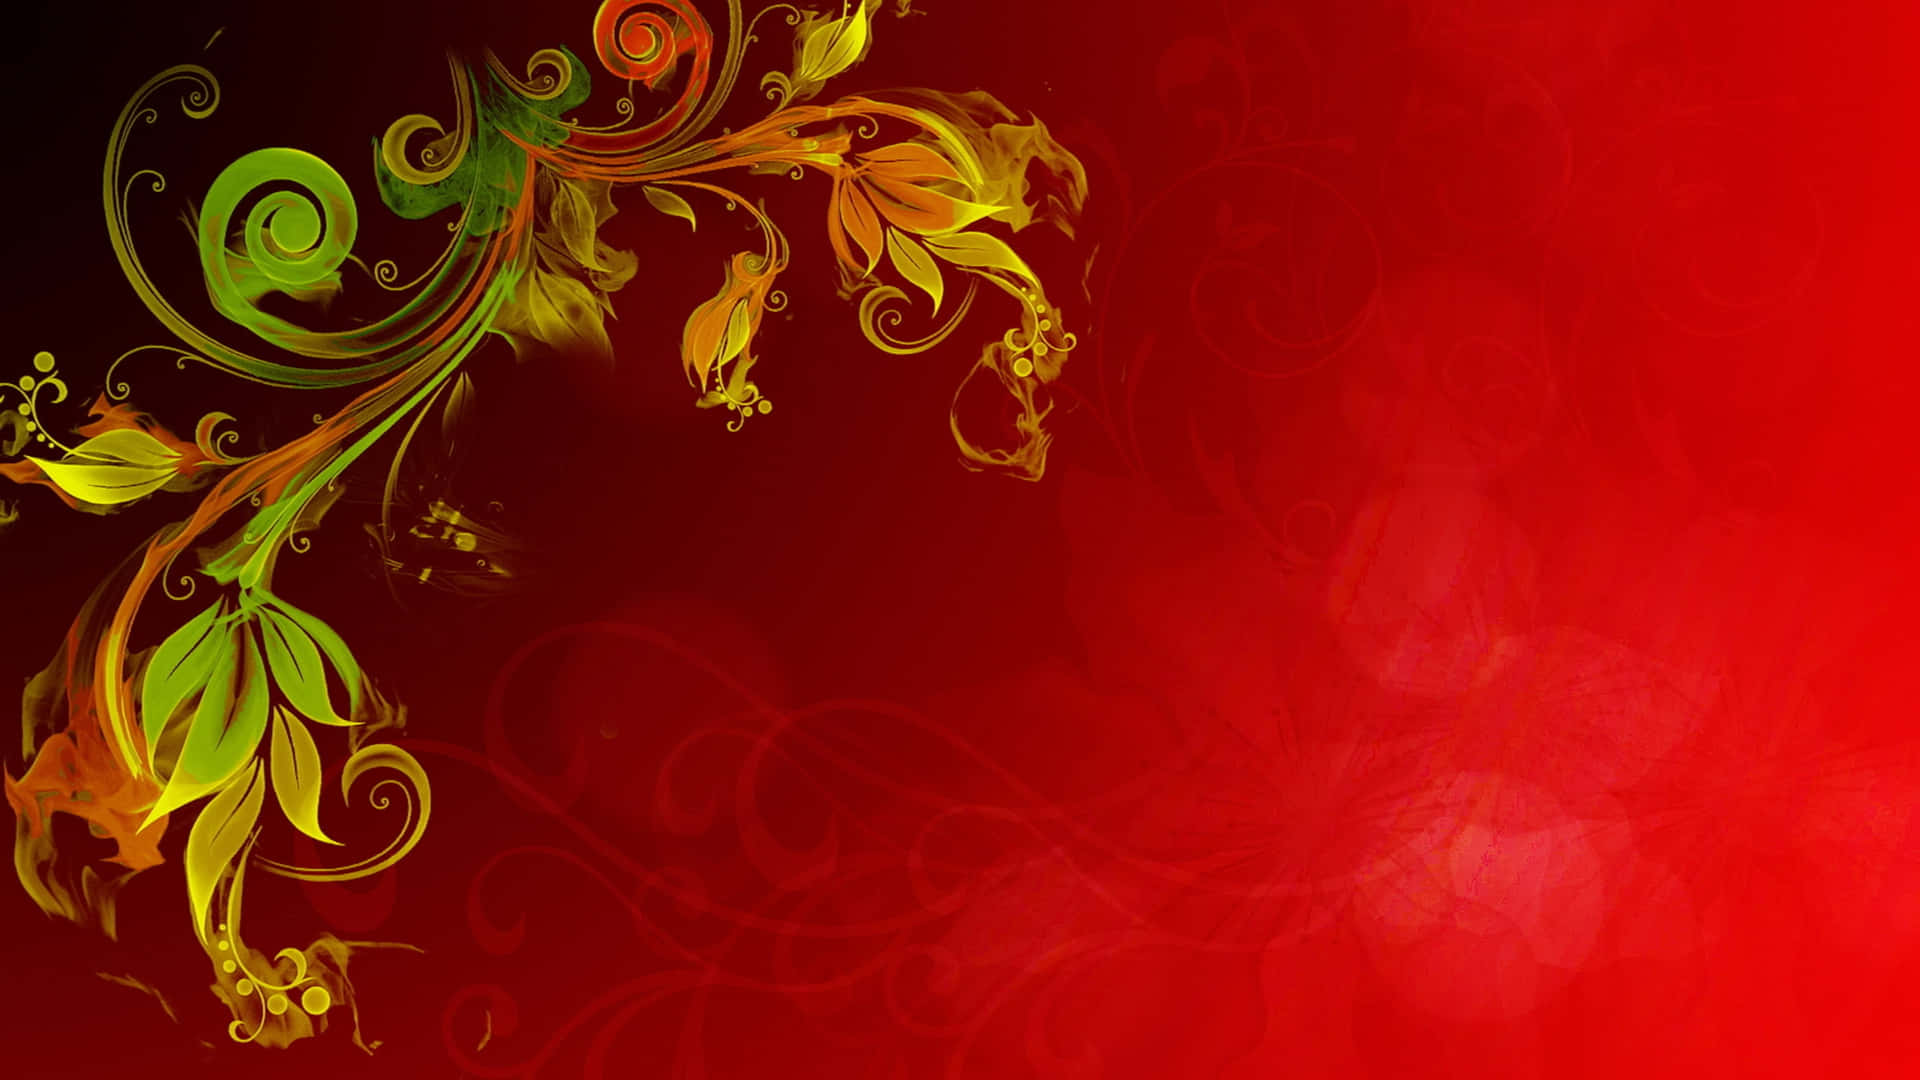 Landscape Red And Green Floral Background